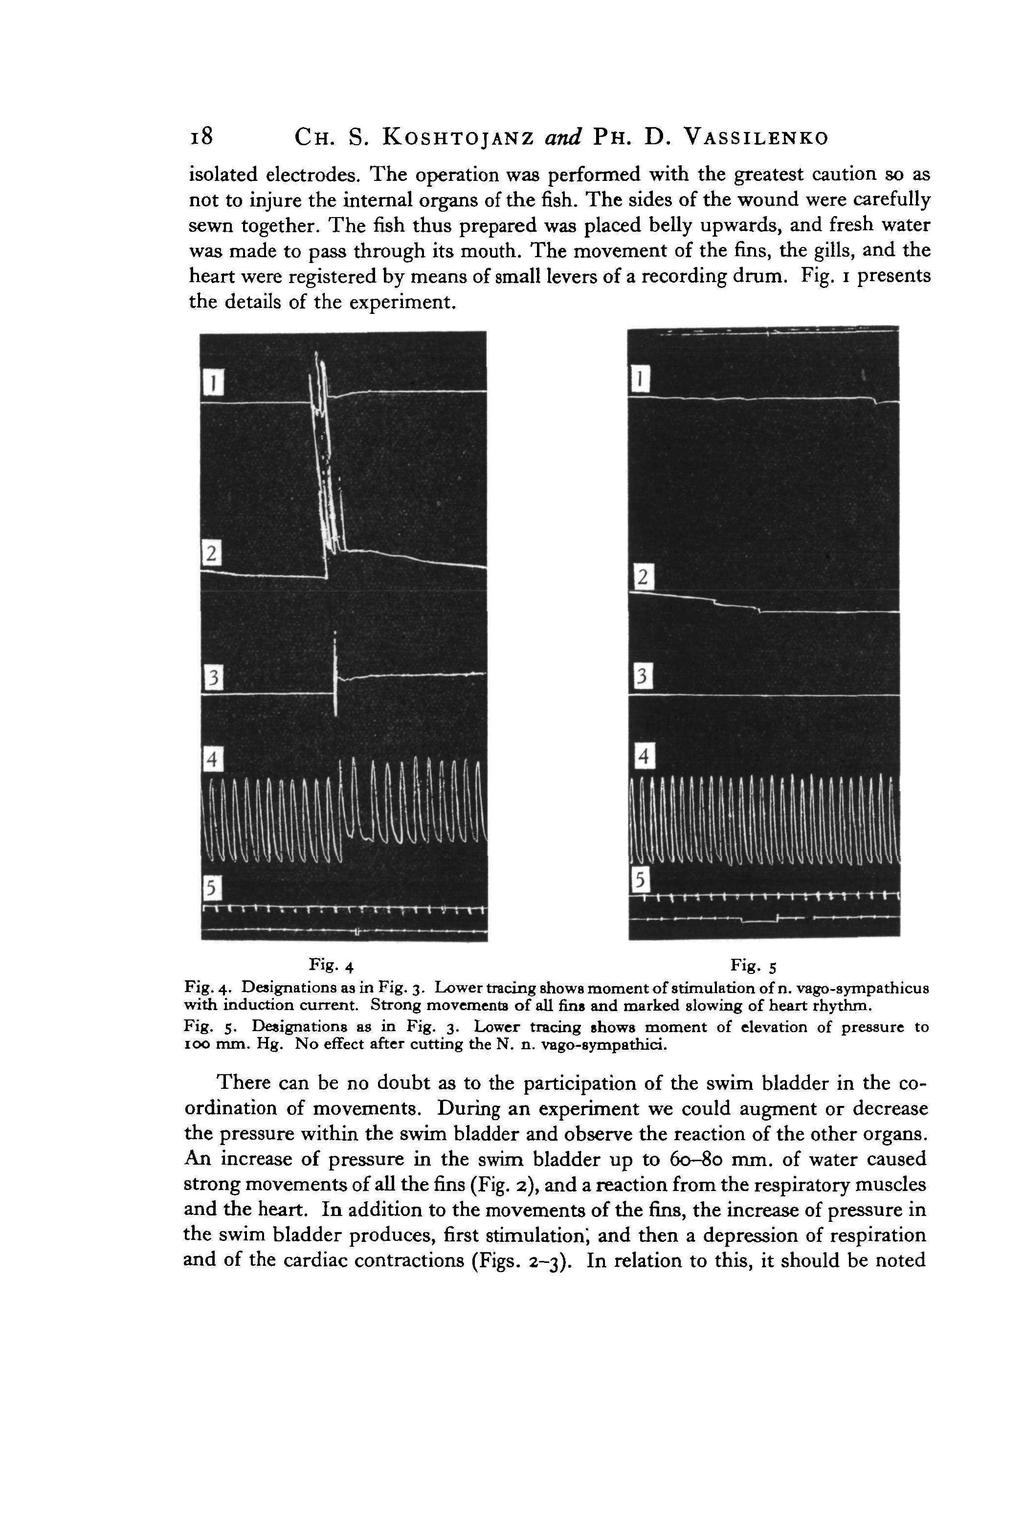 i8 CH. S. KOSHTOJANZ and PH. D. VASSILENKO isolated electrodes. The operation was performed with the greatest caution so as not to injure the internal organs of the fish.